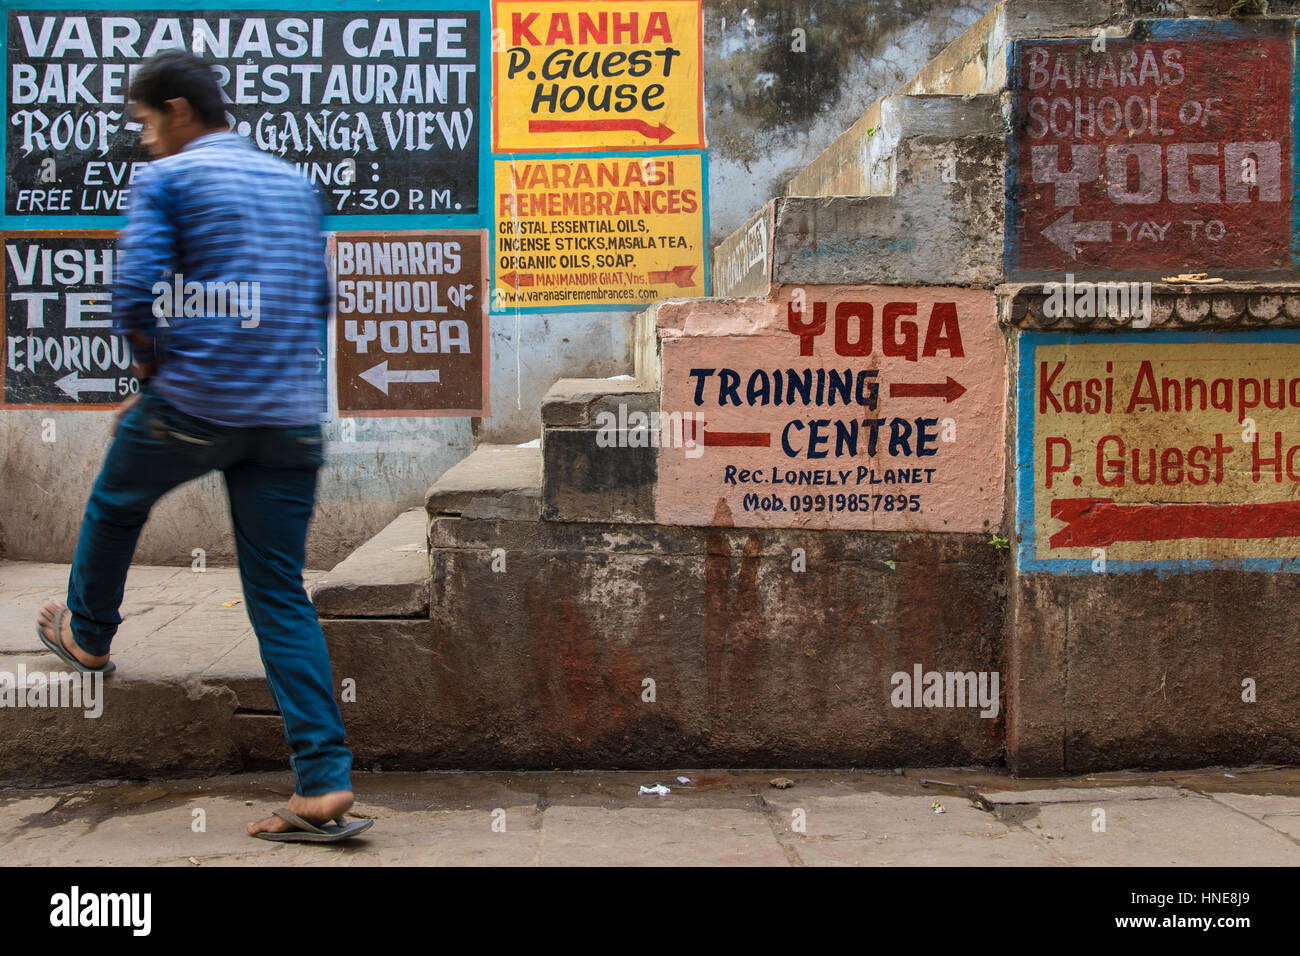 Hand painted signs advertising yoga lodges, music schools and restaurants in Varanasi, India, one of the country's most popular tourist destinations. Stock Photo